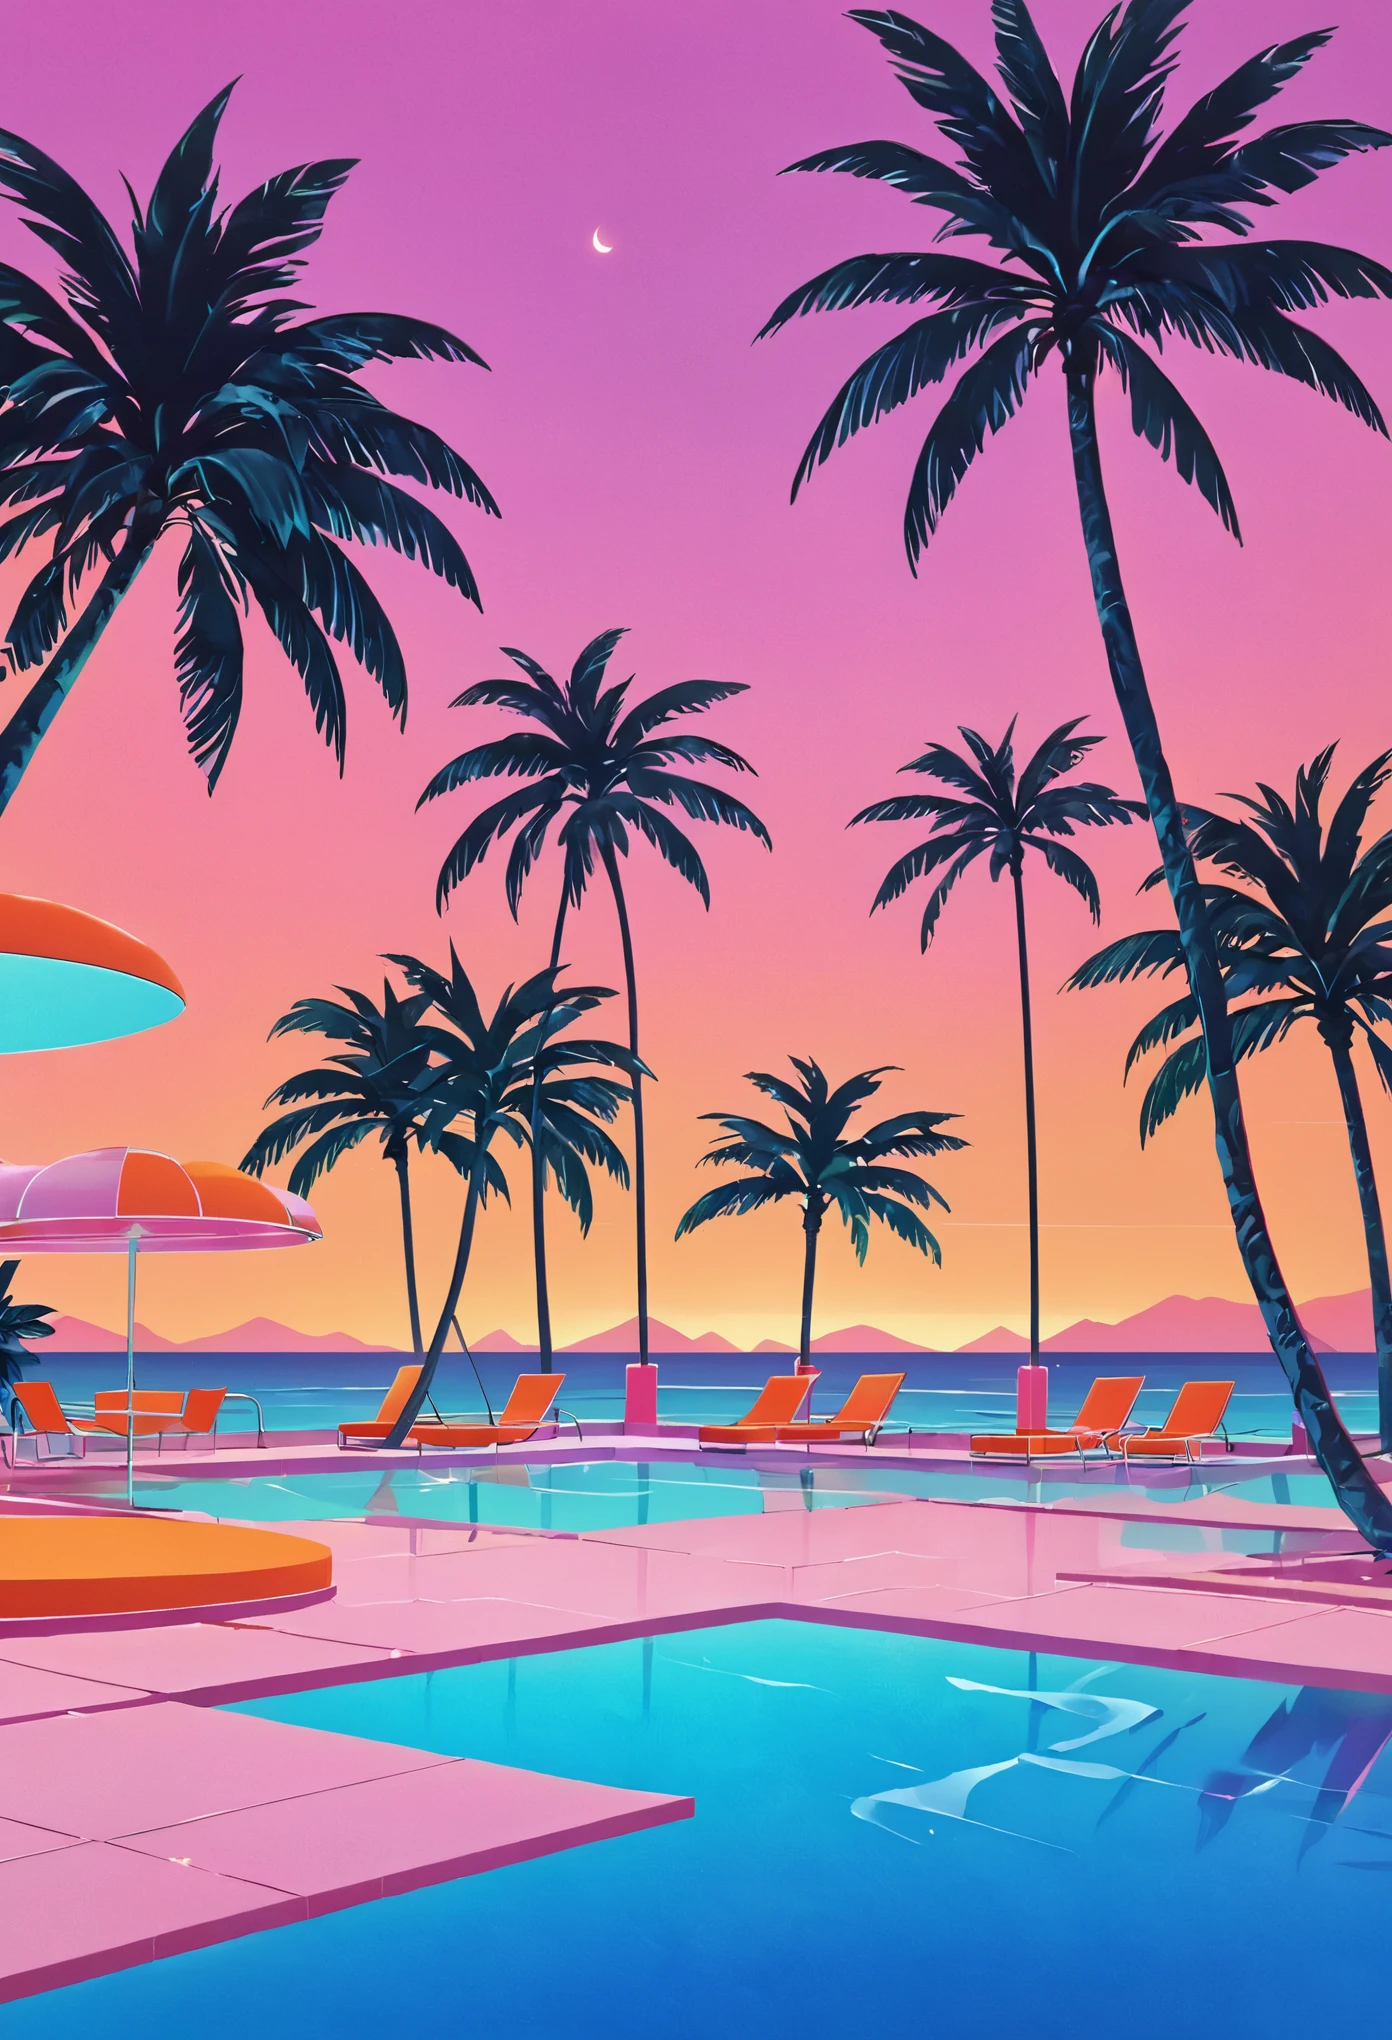 Envision an artwork deeply immersed in the vaporwave aesthetic of the 80s, inspired by Yoko Honda’s vibrant style. Picture a retro-futuristic pool and beach scene at sunset, where the sky blazes with the warm hues of an 80s summer sunset—intense oranges, pinks, and reds reflecting off the tranquil sea and pool waters. Around the pool, neon-lit palm trees and coconut trees sway gently, enhancing the tropical and surreal atmosphere. Neon lights in geometric patterns illuminate the scene, casting a dreamlike glow over everything. The background features a chic beachside bar with interiors visible through large glass windows, showcasing a room with pastel-colored walls and floors covered in luxurious terrazzo and marble textures. The overall ambiance combines nostalgic luxury with vibrant, warm color palettes, creating a scene that is both timeless and distinctly evocative of the 80s.